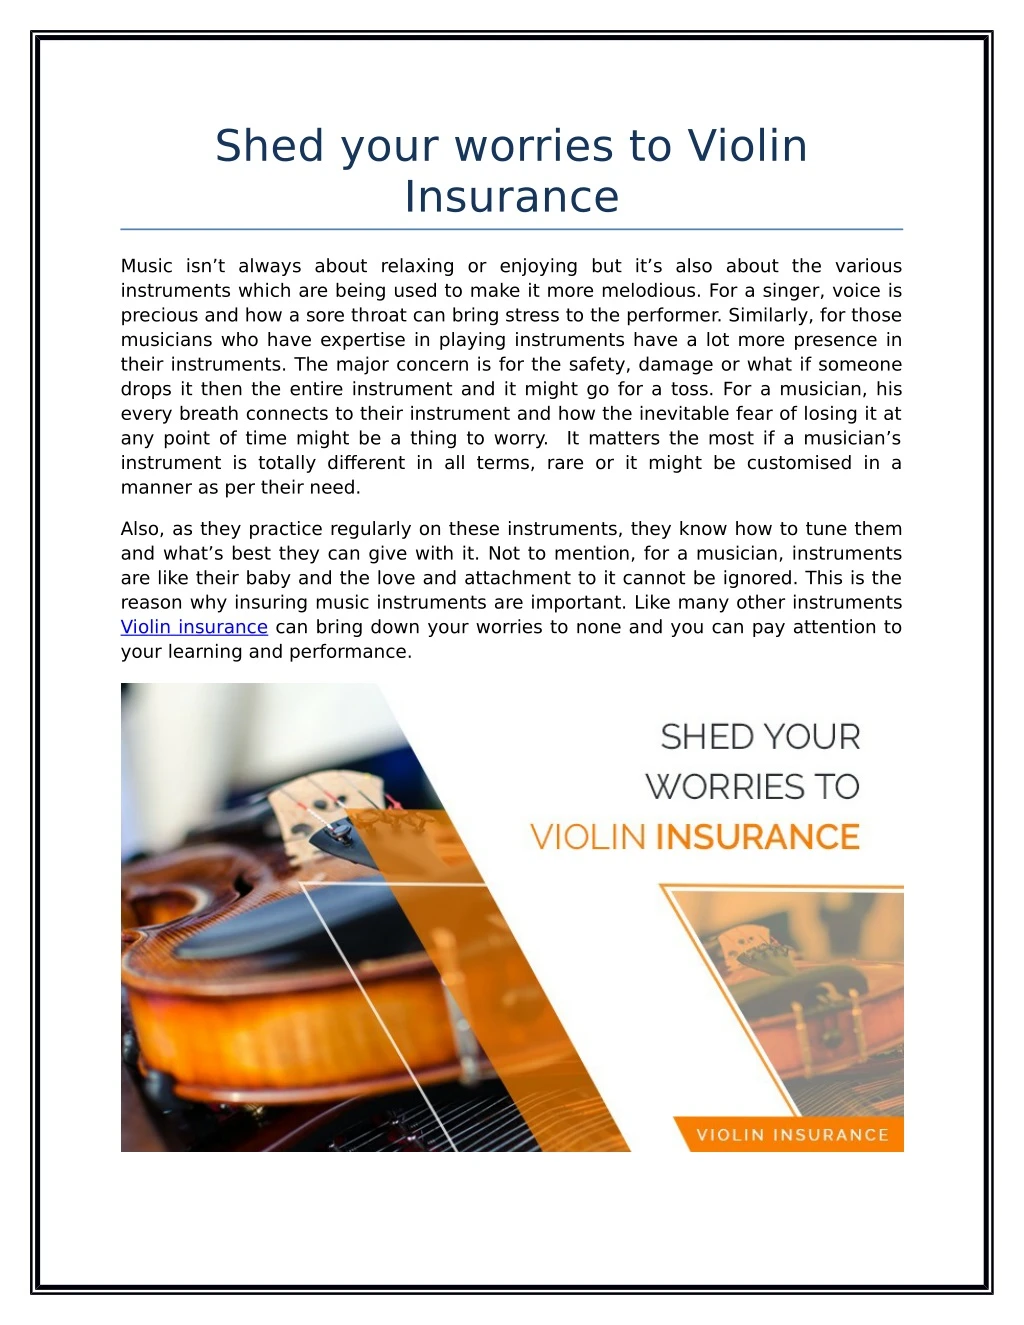 shed your worries to violin insurance